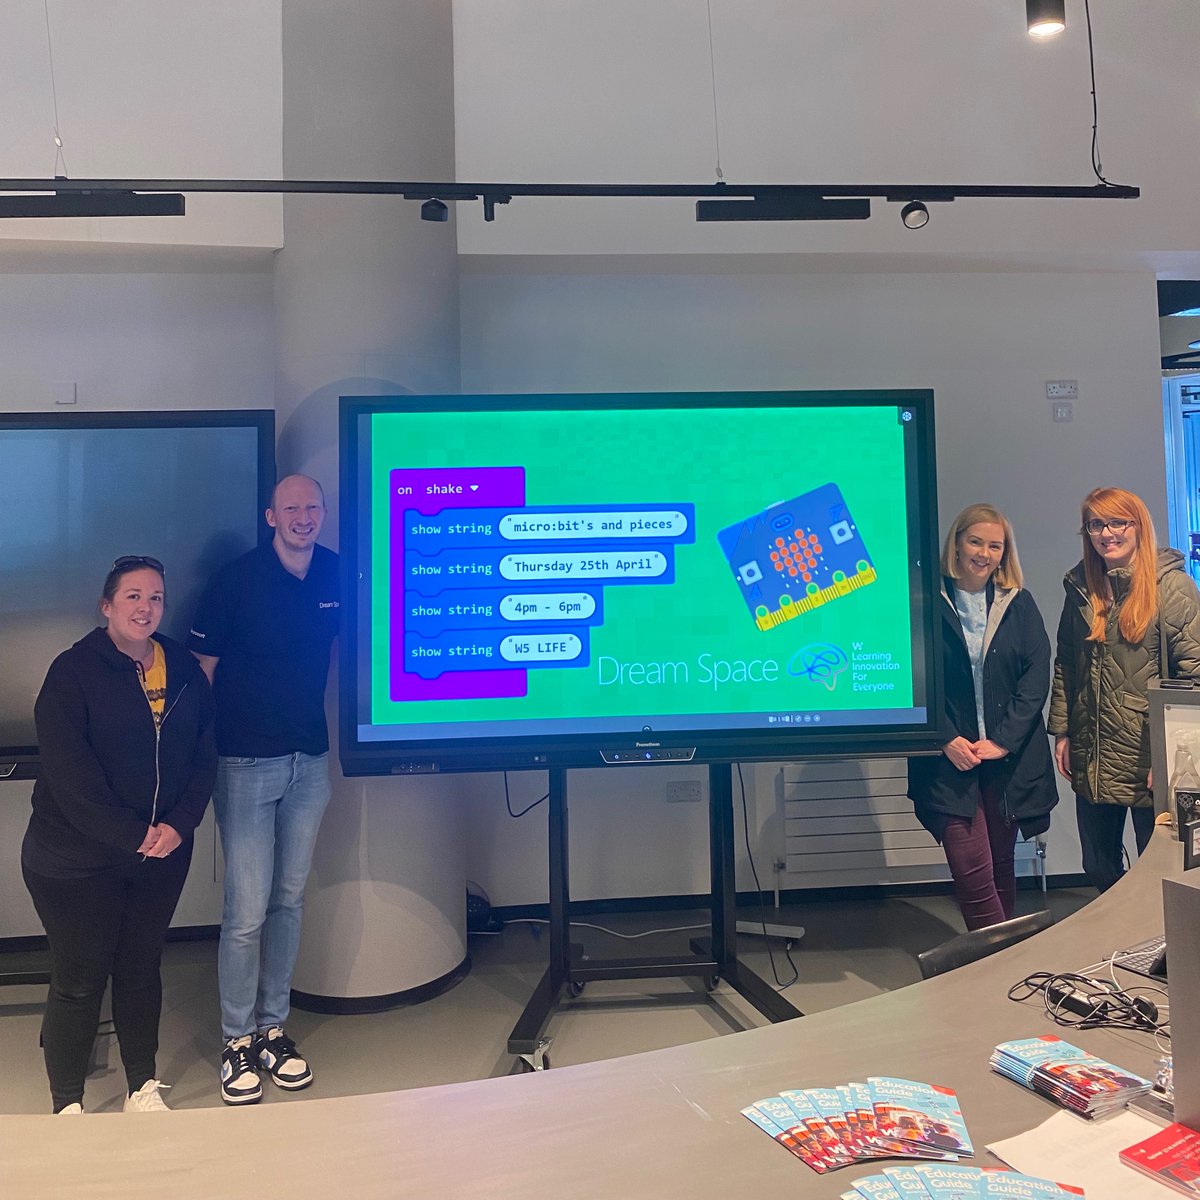 On 25 April, Matty from our Dream Space team ran a teacher training event on micro:bit. 🧑‍🏫

The teachers were introduced to this pocket-sized computer and discovered how they could use it in the classroom. 💡

Thank you to everyone who attended! 👏

#MSDreamSpace | @MS_eduIRL